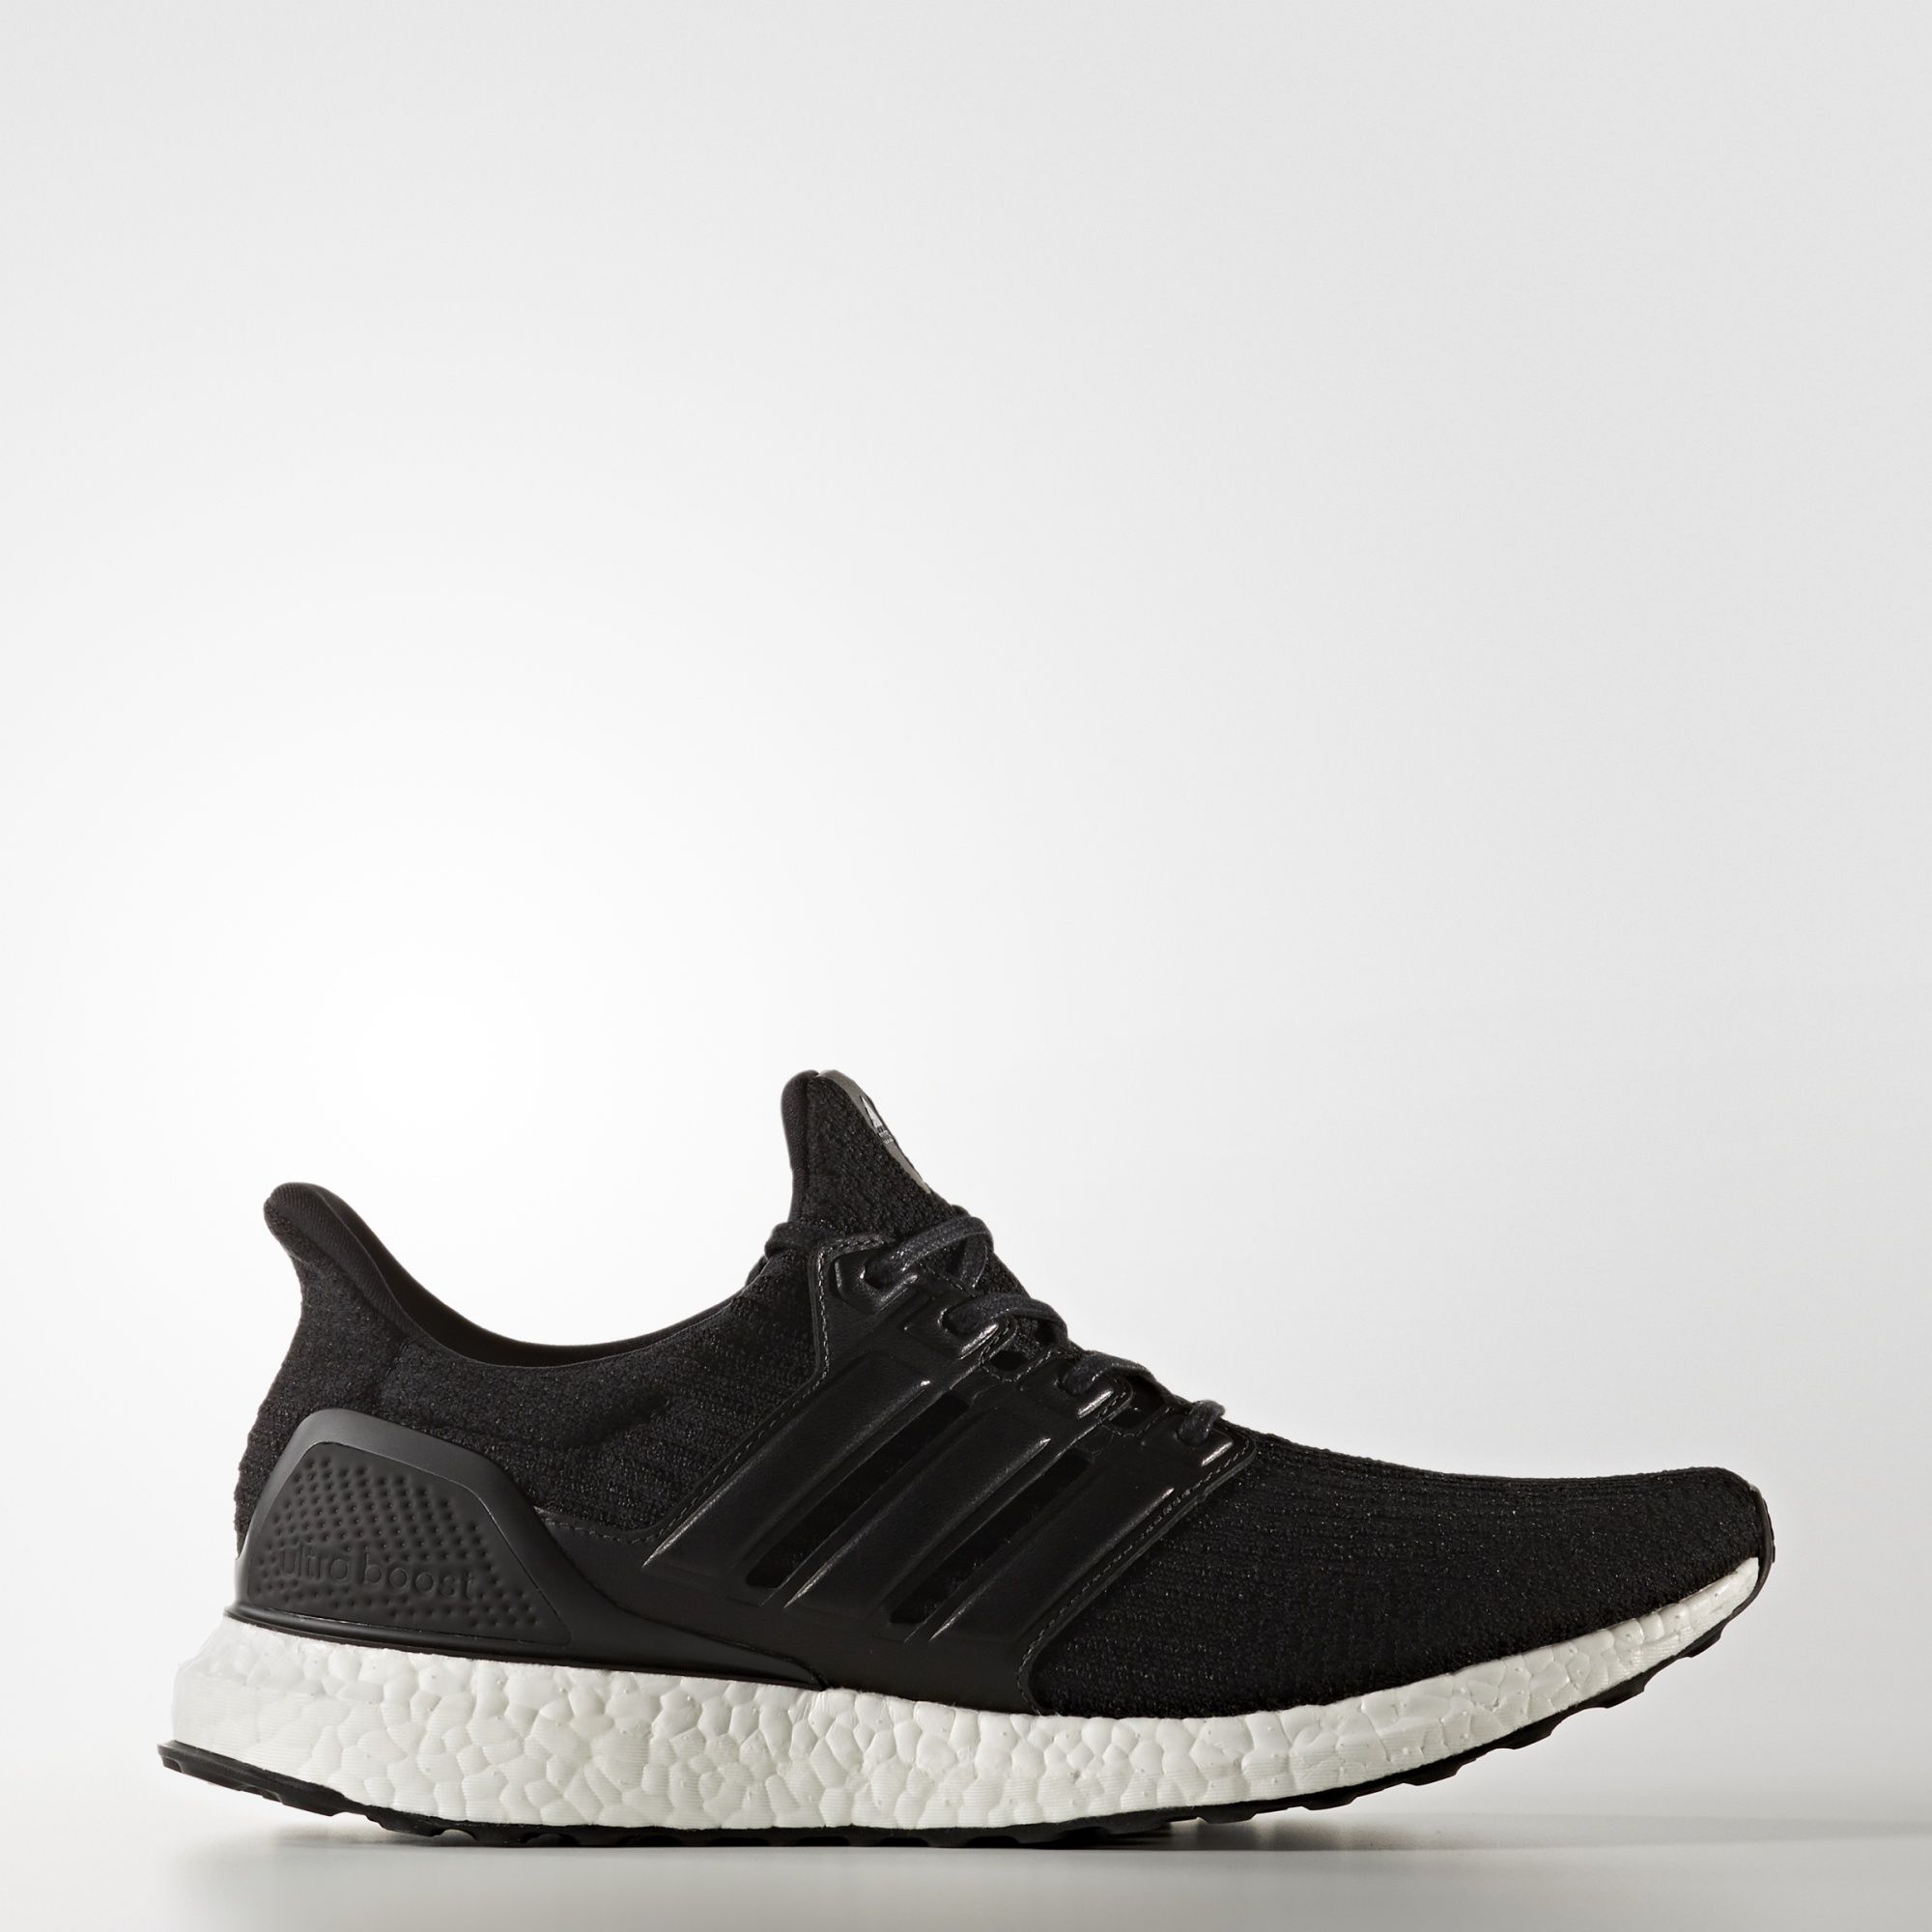 adidas-ultra-boost-3-limited-edition-core-black-2